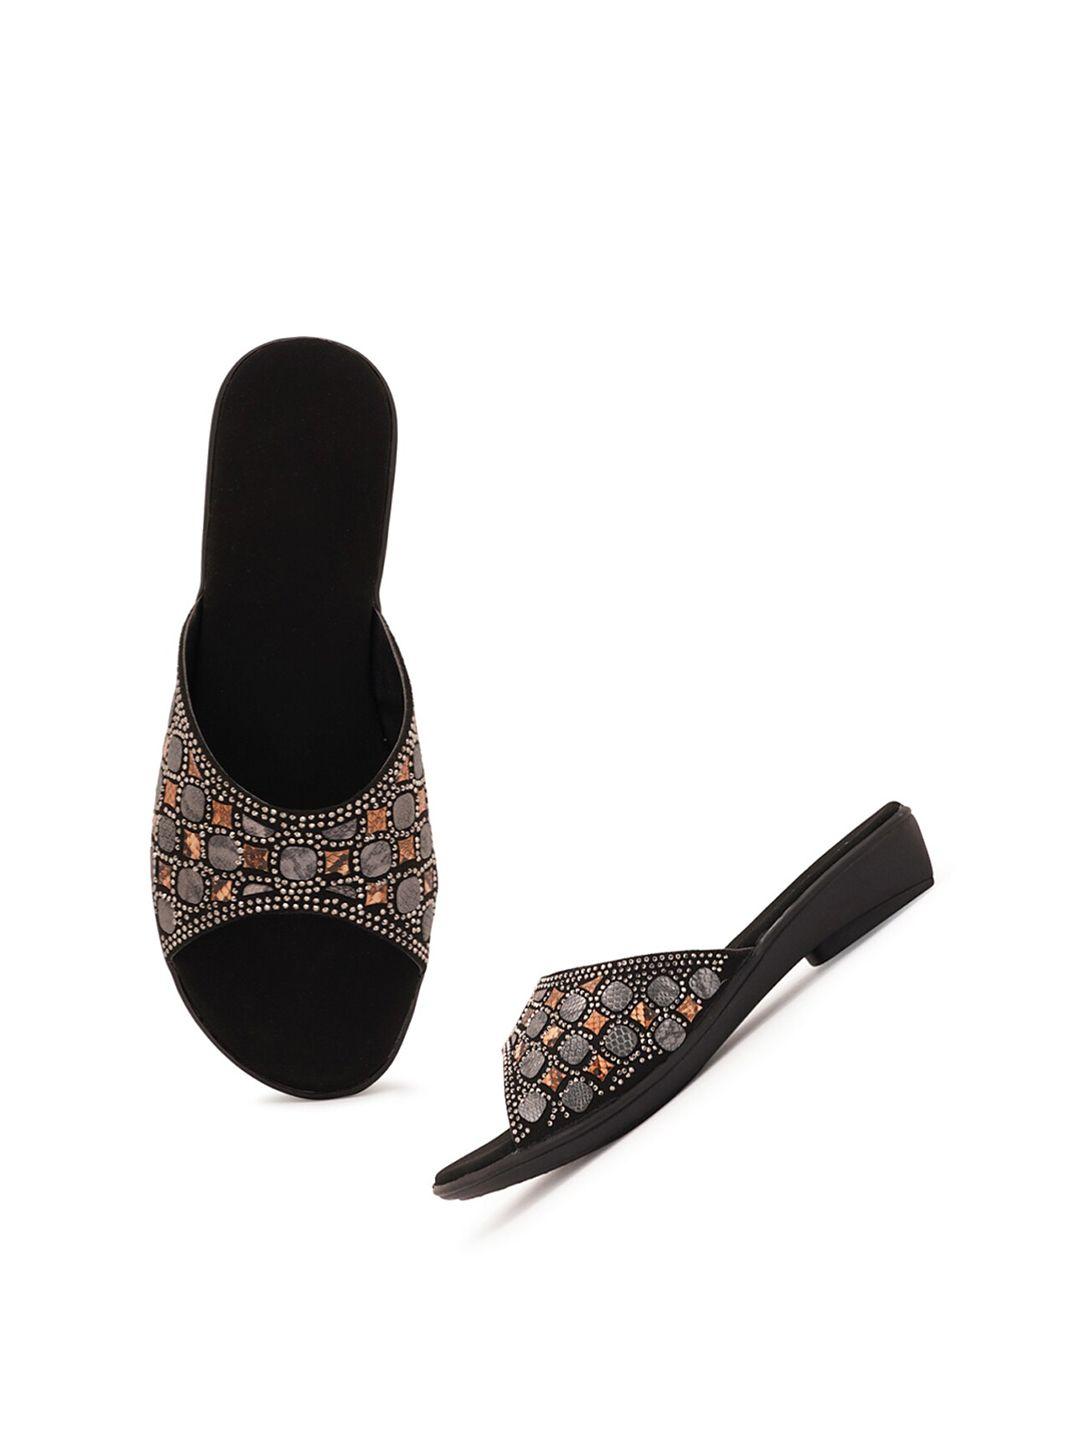 style shoes women black embellished party open toe flats